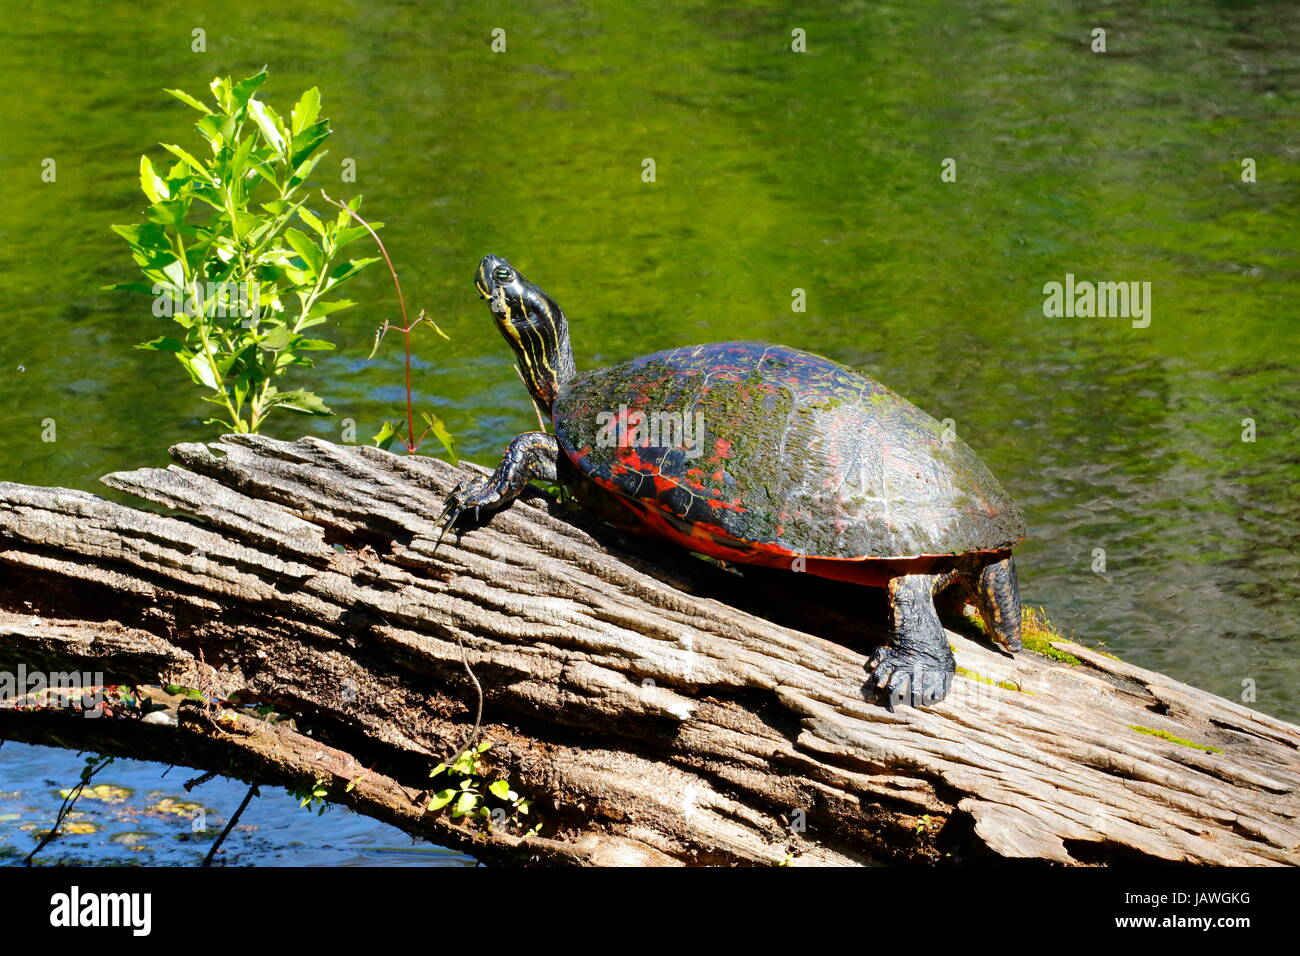 A Florida red bellied cooter, Pseudemys nelsoni. Stock Photo